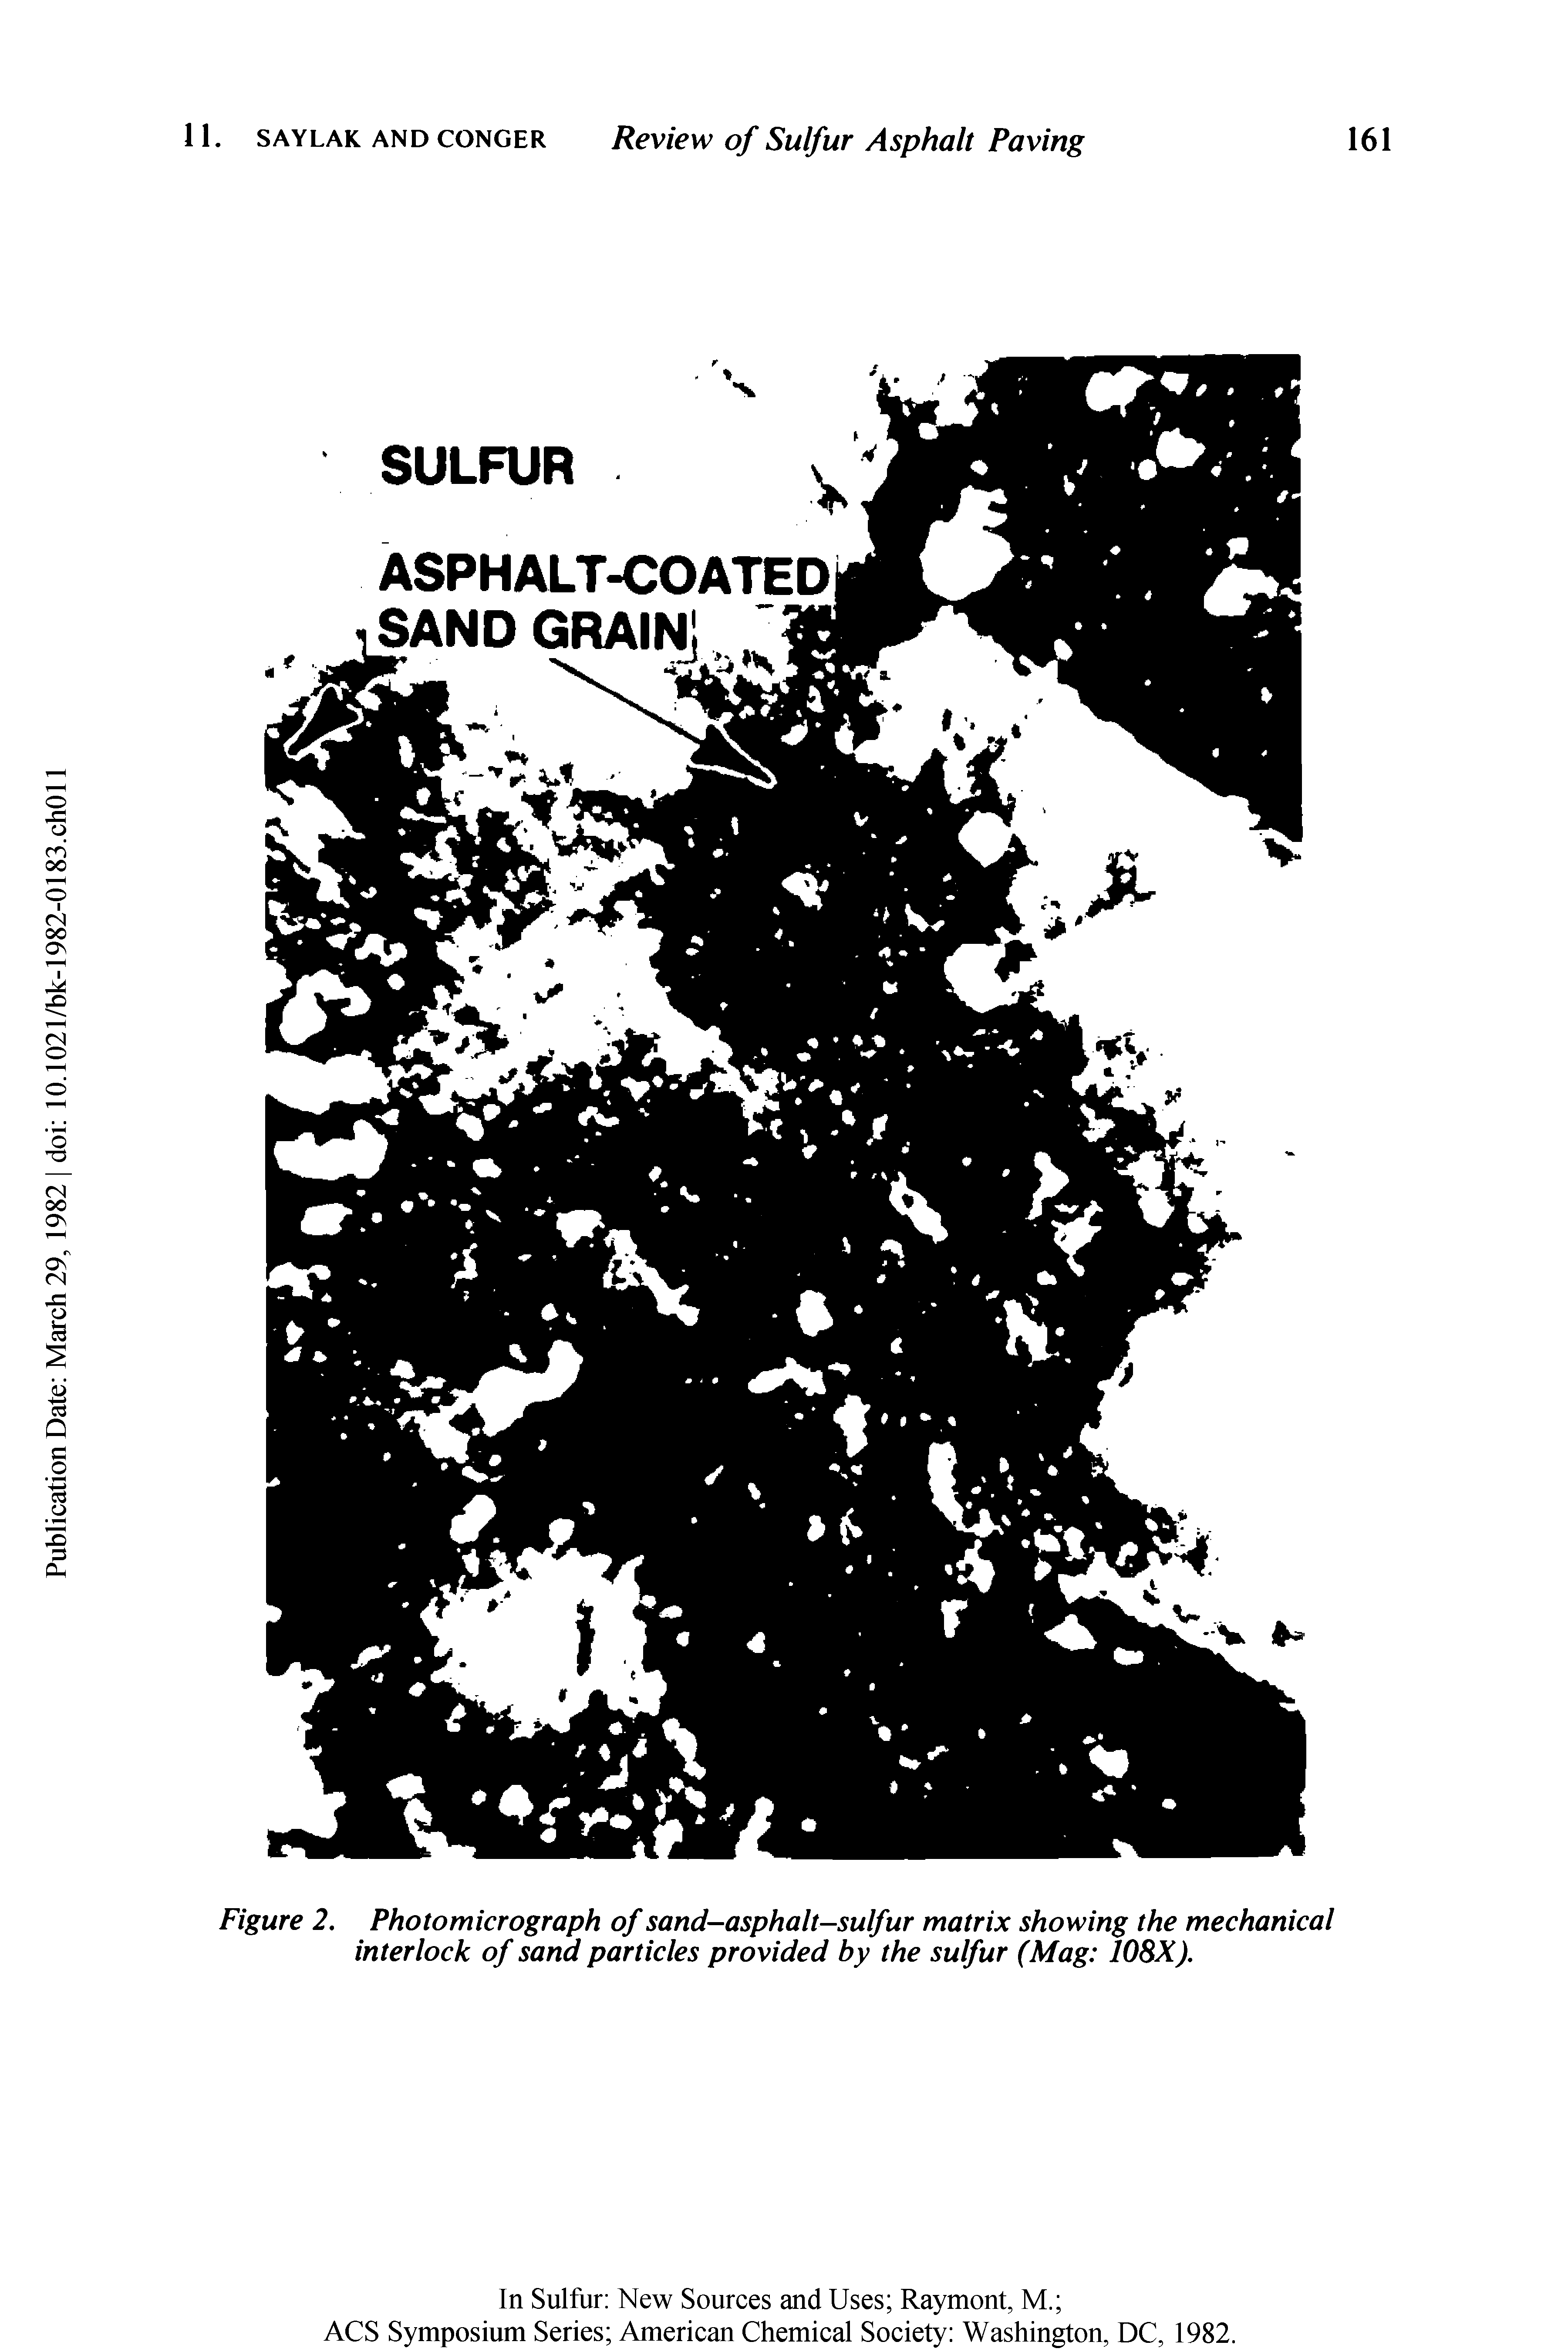 Figure 2. Photomicrograph of sand-asphalt-sulfur matrix showing the mechanical interlock of sand particles provided by the sulfur (Mag 108X).